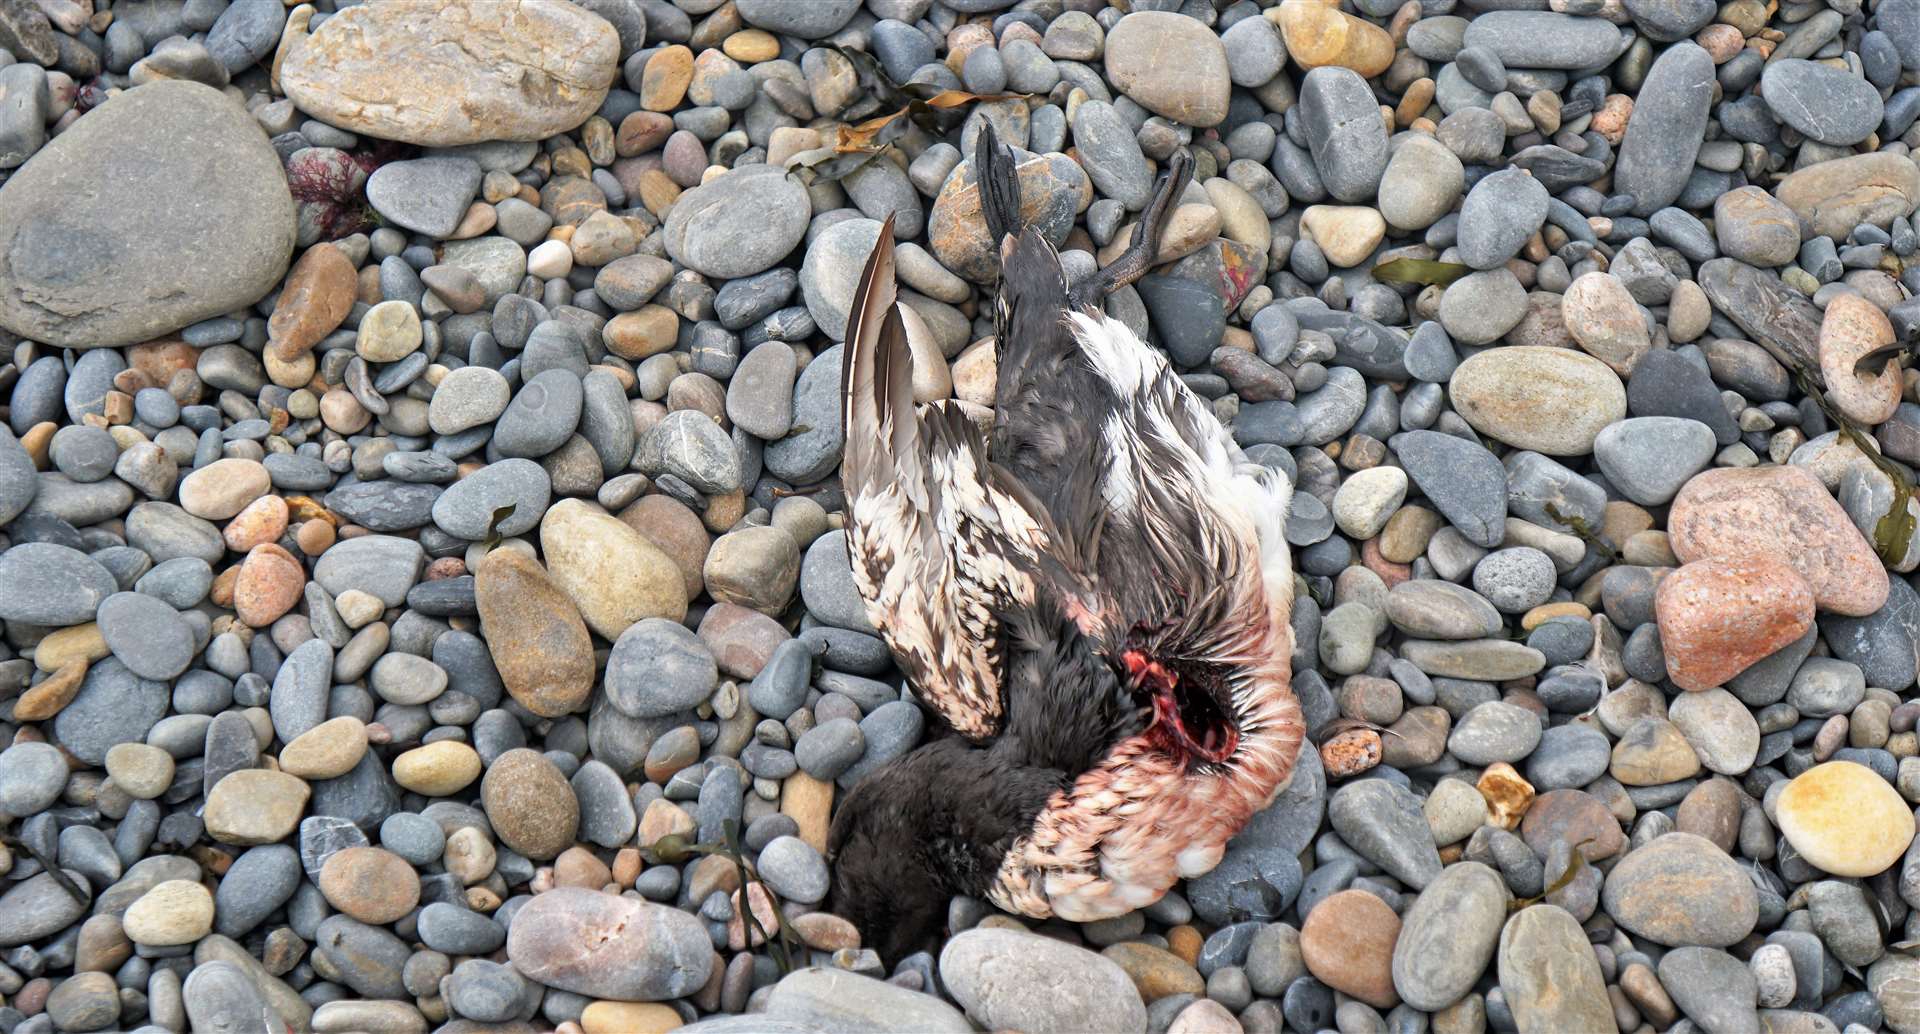 This guillemot has had its innards apparently pecked out by a scavenging bird thus spreading any disease it may have had. Picture: DGS